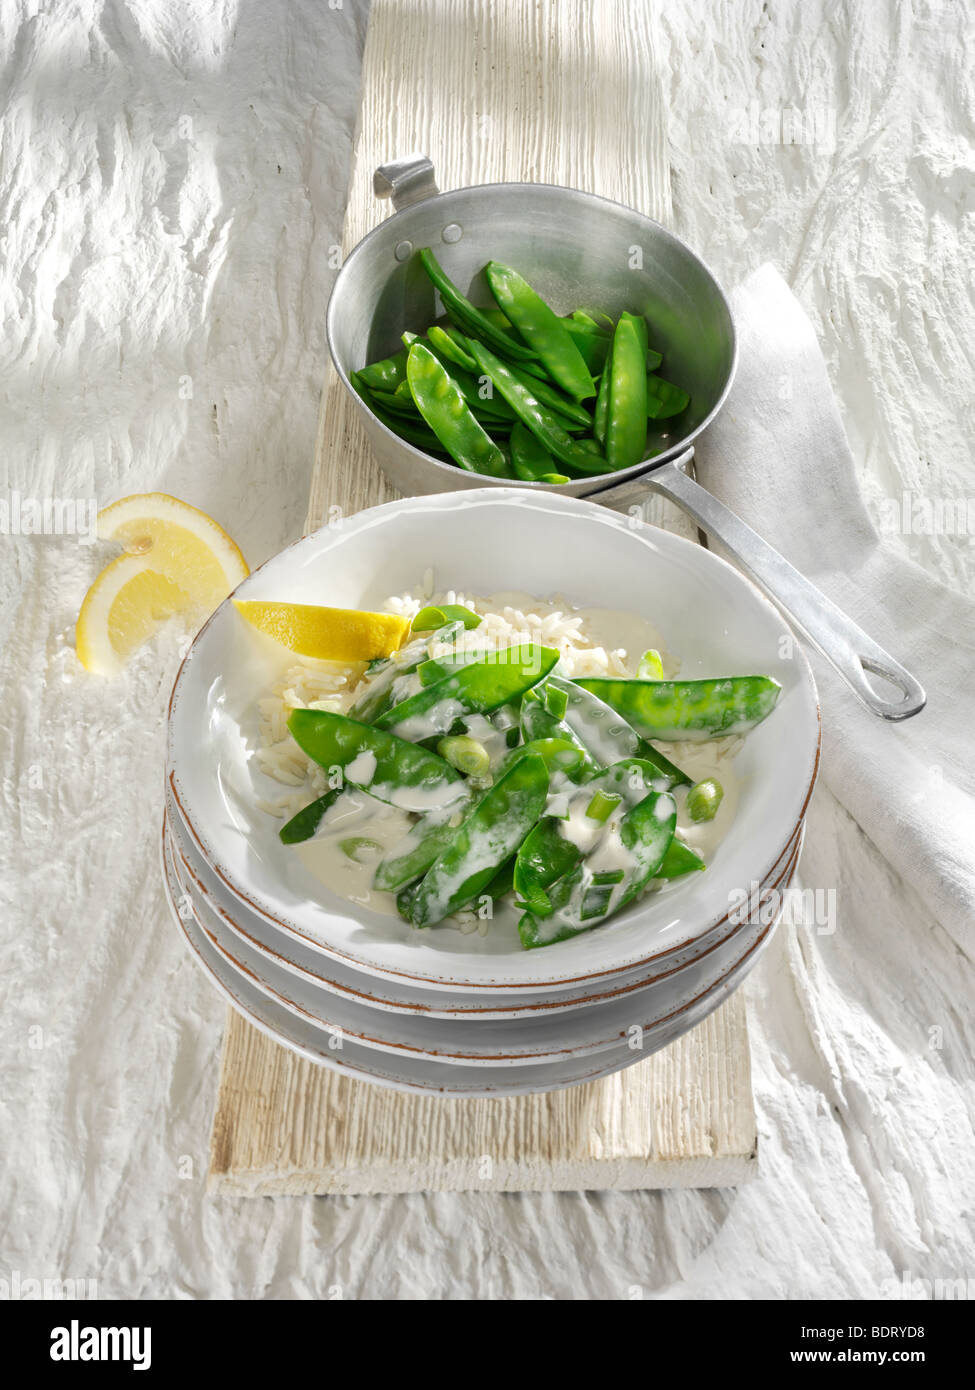 Snow peas with lemon sauce and lemon slices for squeezing in a stack of earthenware dishes Stock Photo